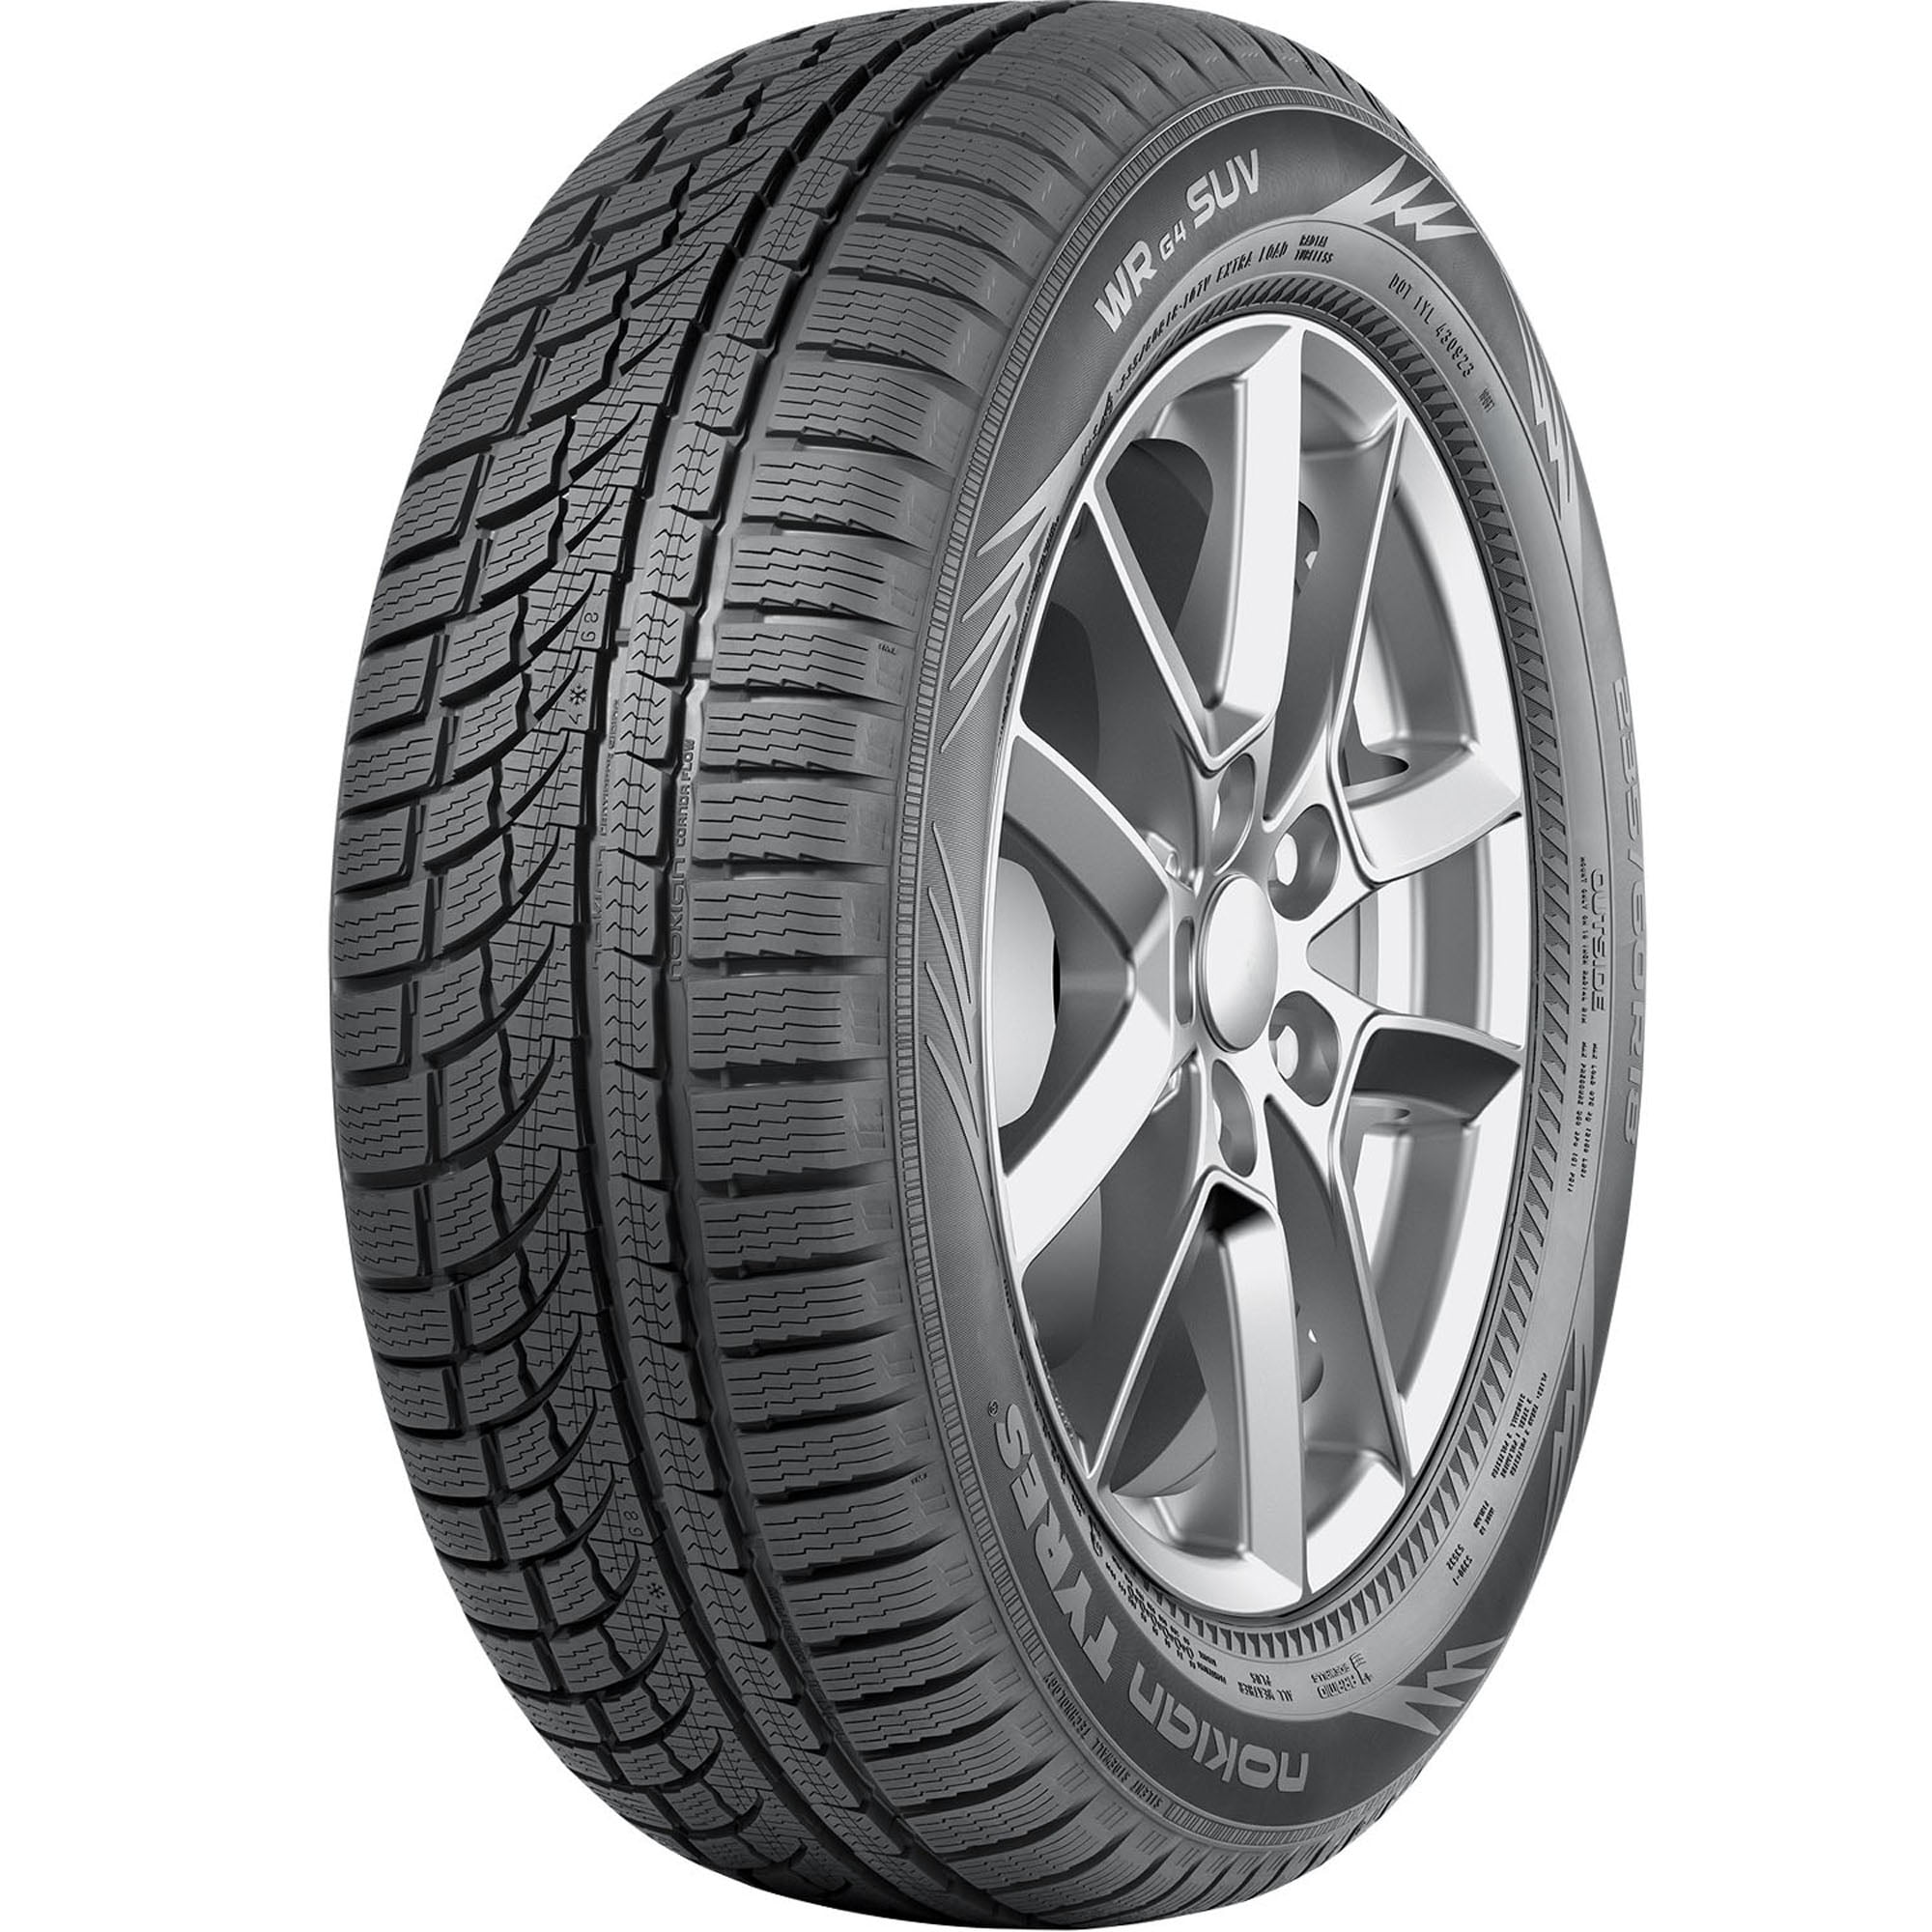 Nokian WR G4 SUV All Weather 235/55R19 105V XL SUV/Crossover Tire